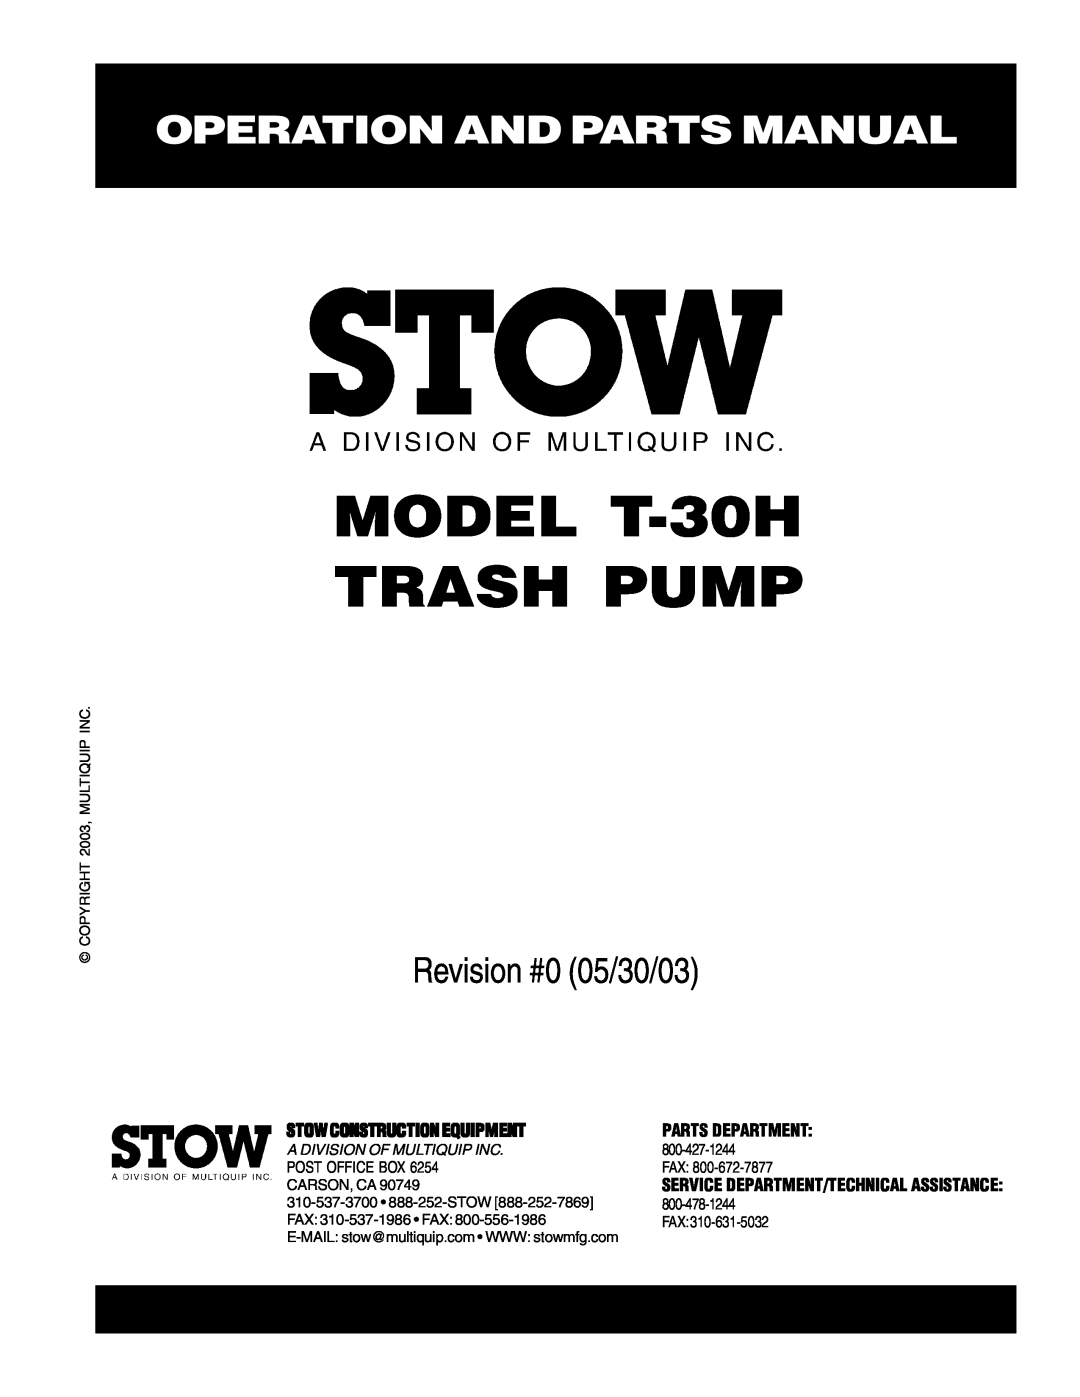 Stow manual Operation And Parts Manual, MODEL T-30H TRASH PUMP, Revision #0 05/30/03, Stowconstructionequipment 